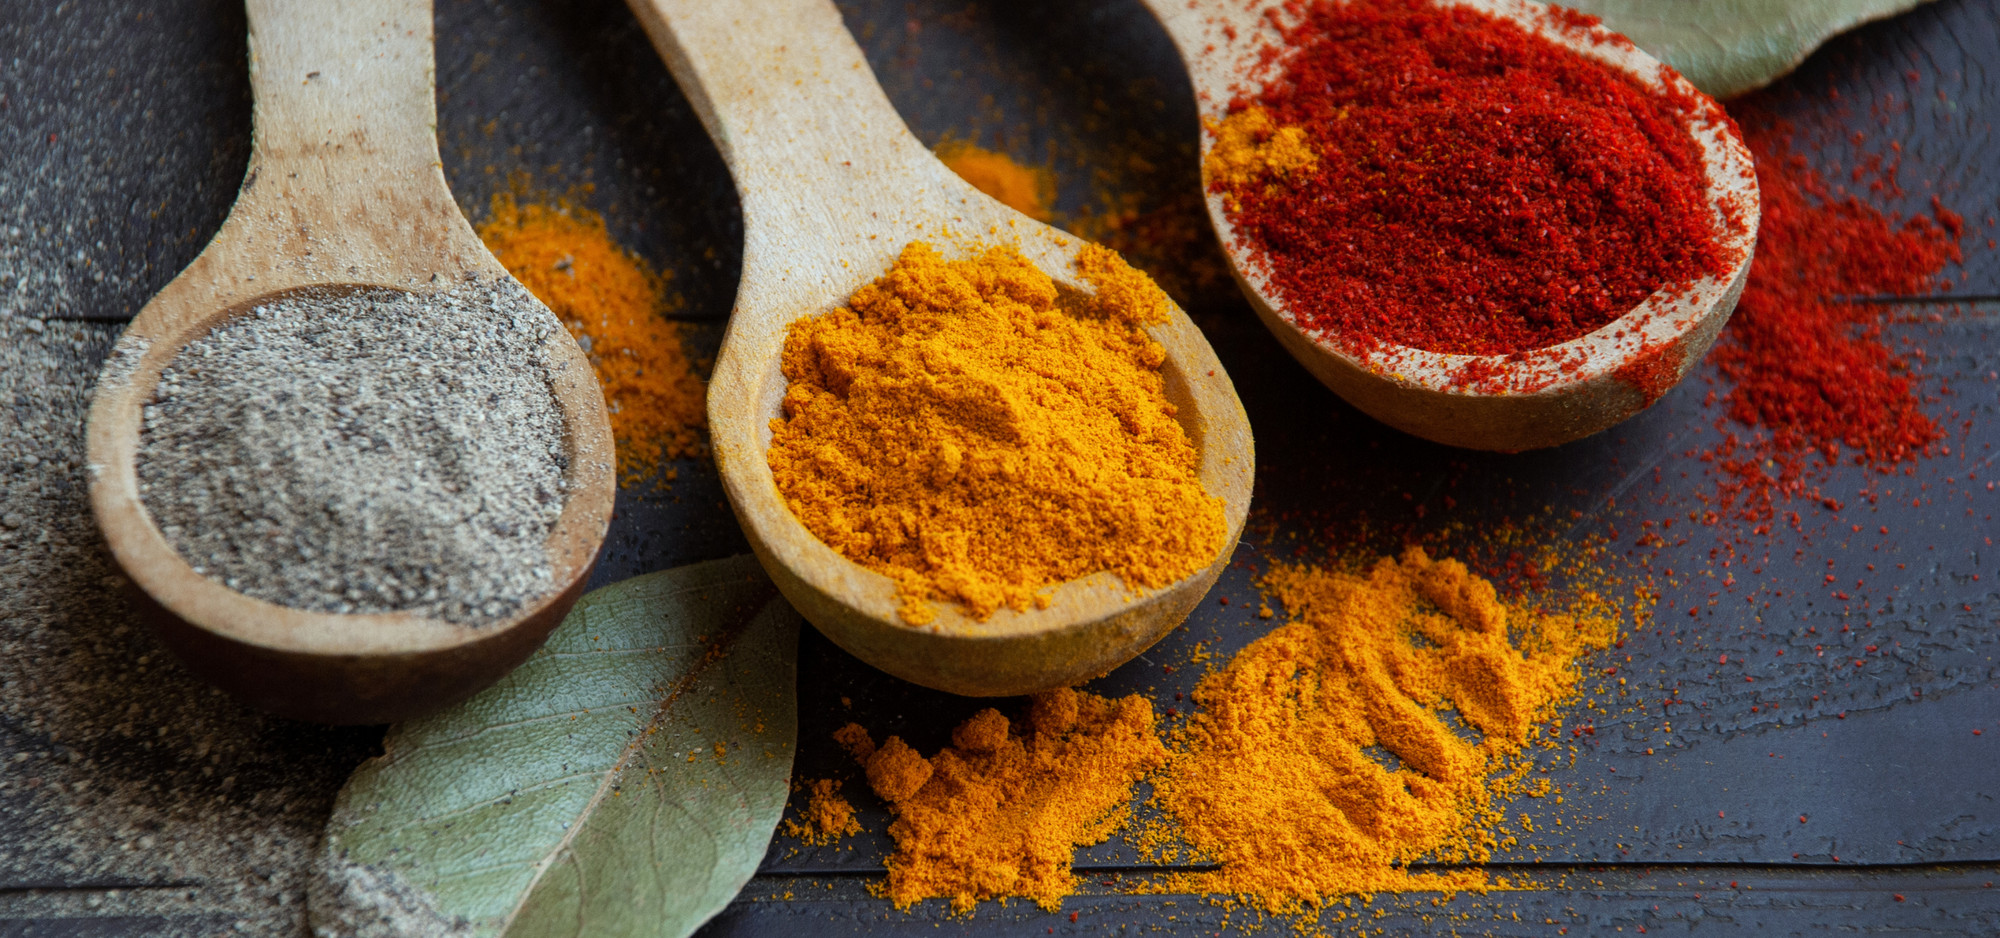 How to Naturally Get Curcumin in Your Diet